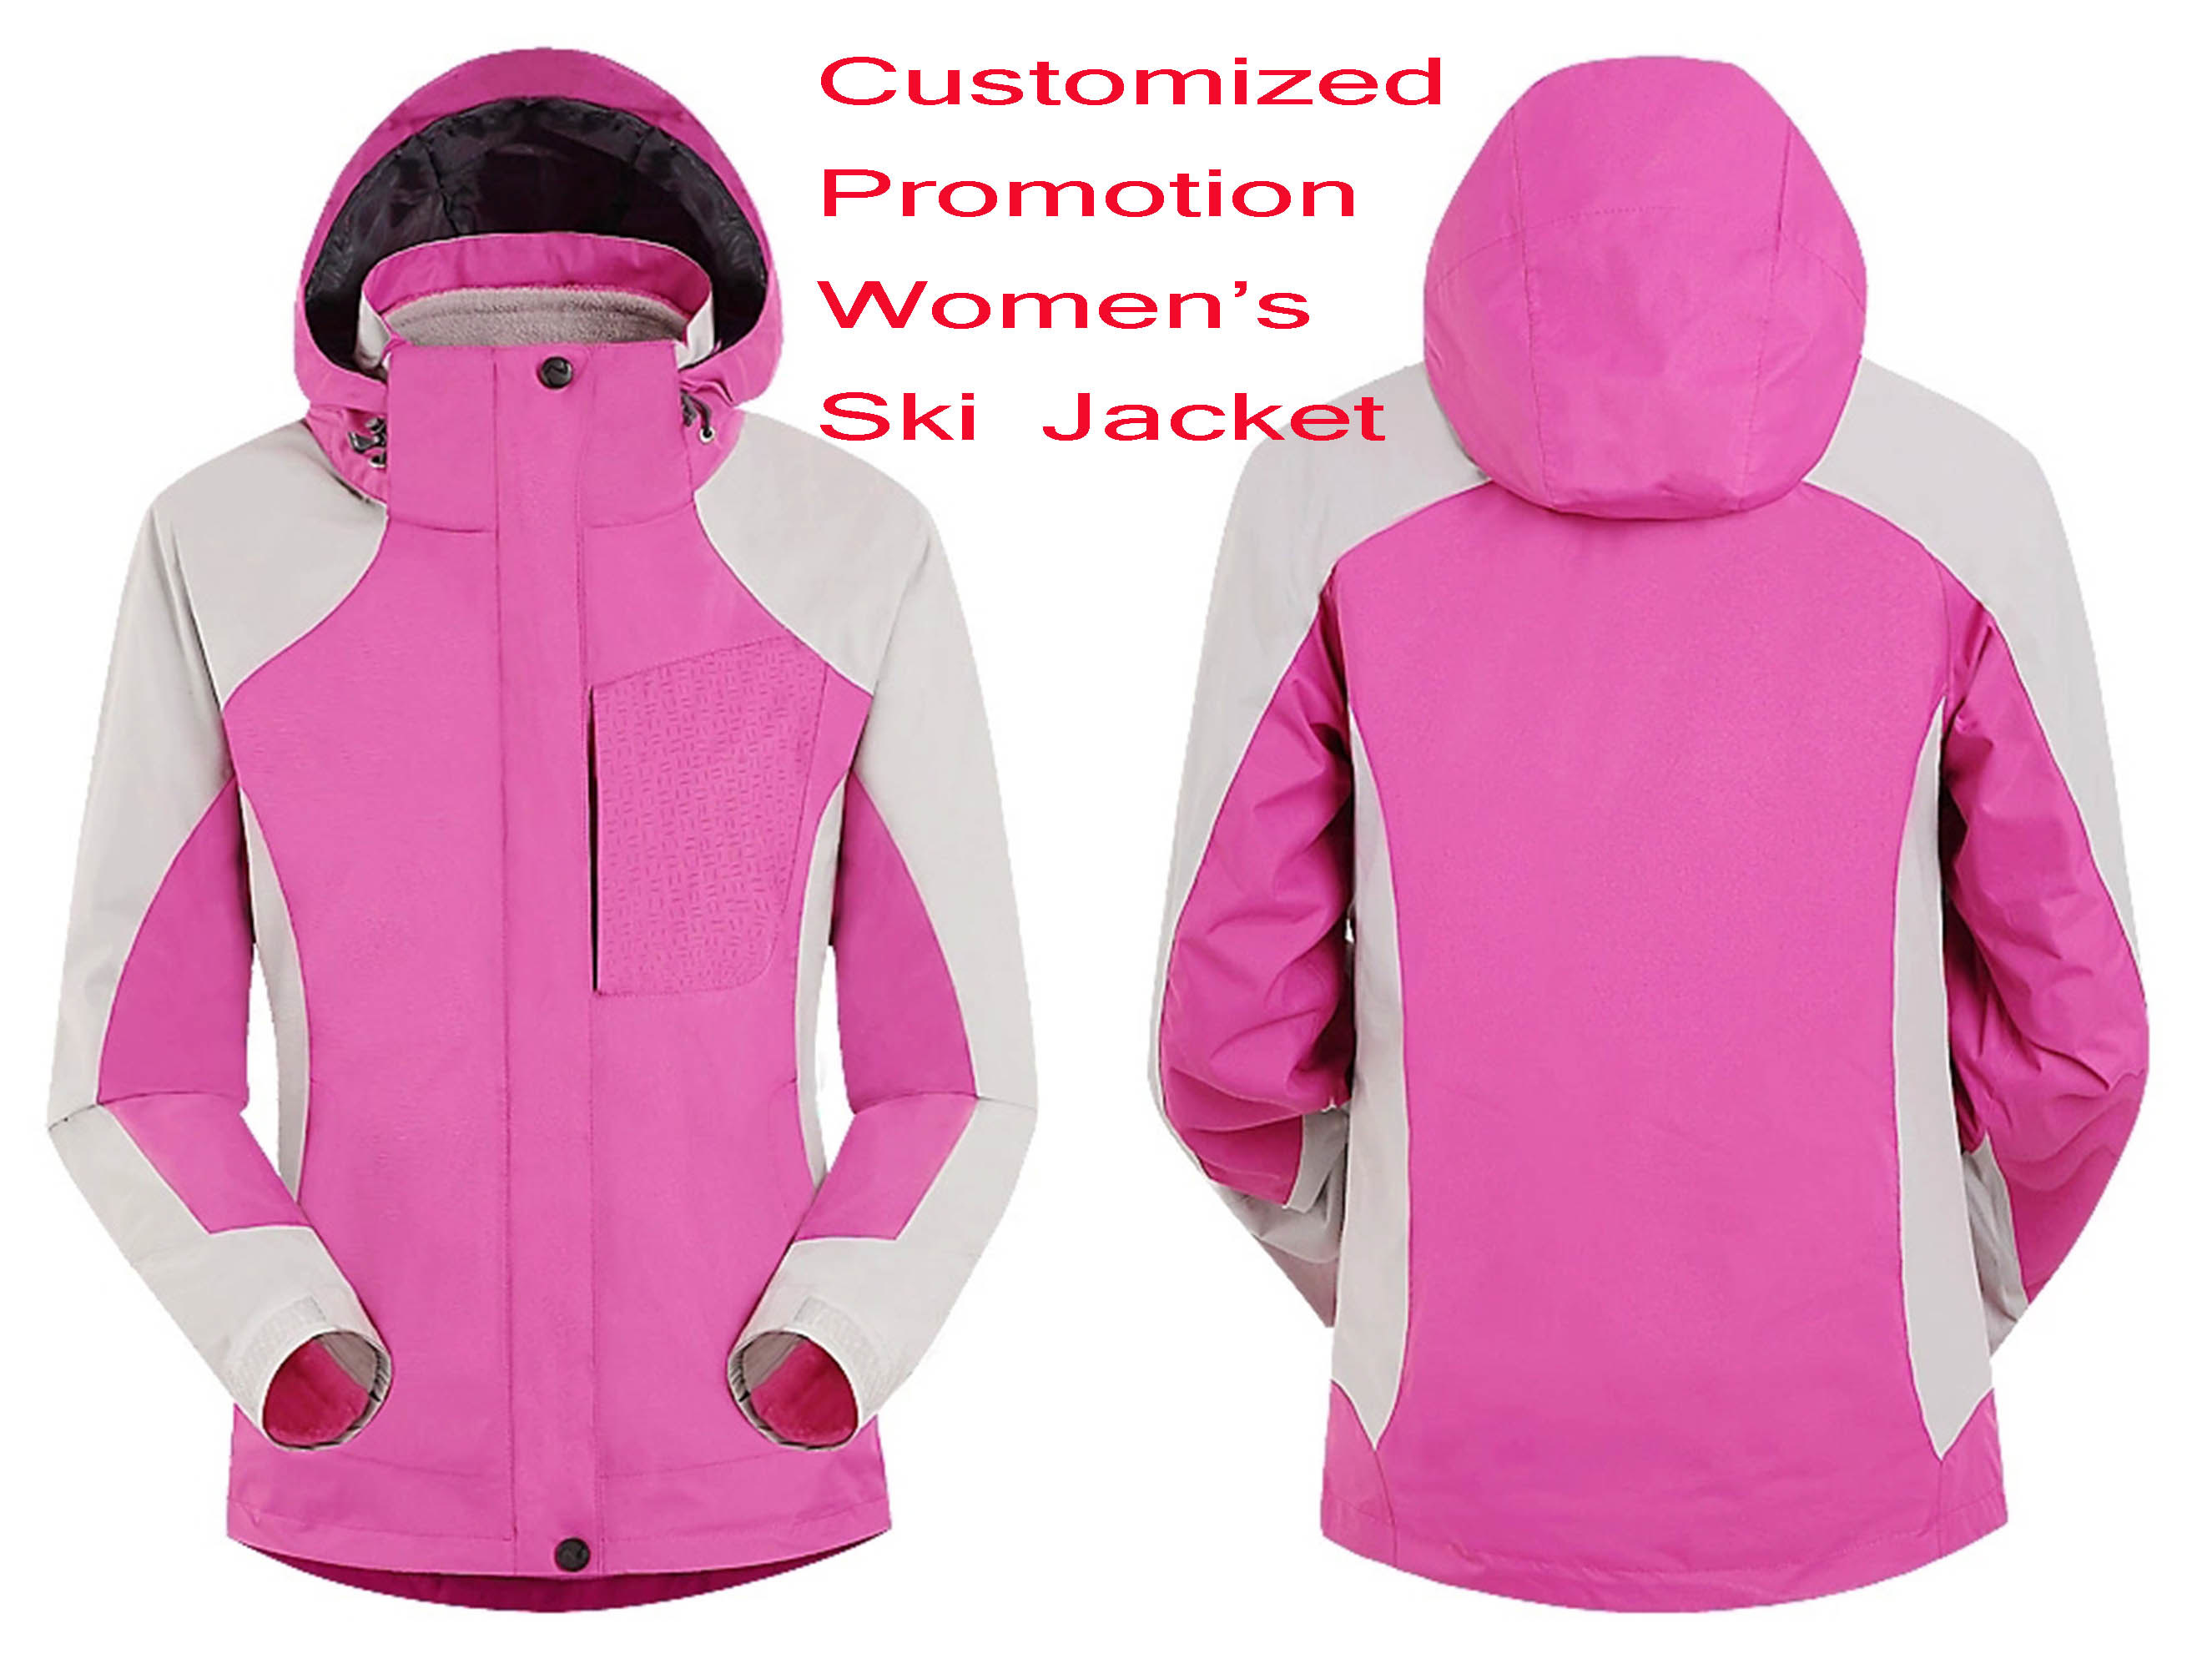 Customized Promotion Outdoor Good Quality Garment, Women's Jacket, Windproof and Waterproof Breathable Ski Mountaineering Sport Wear